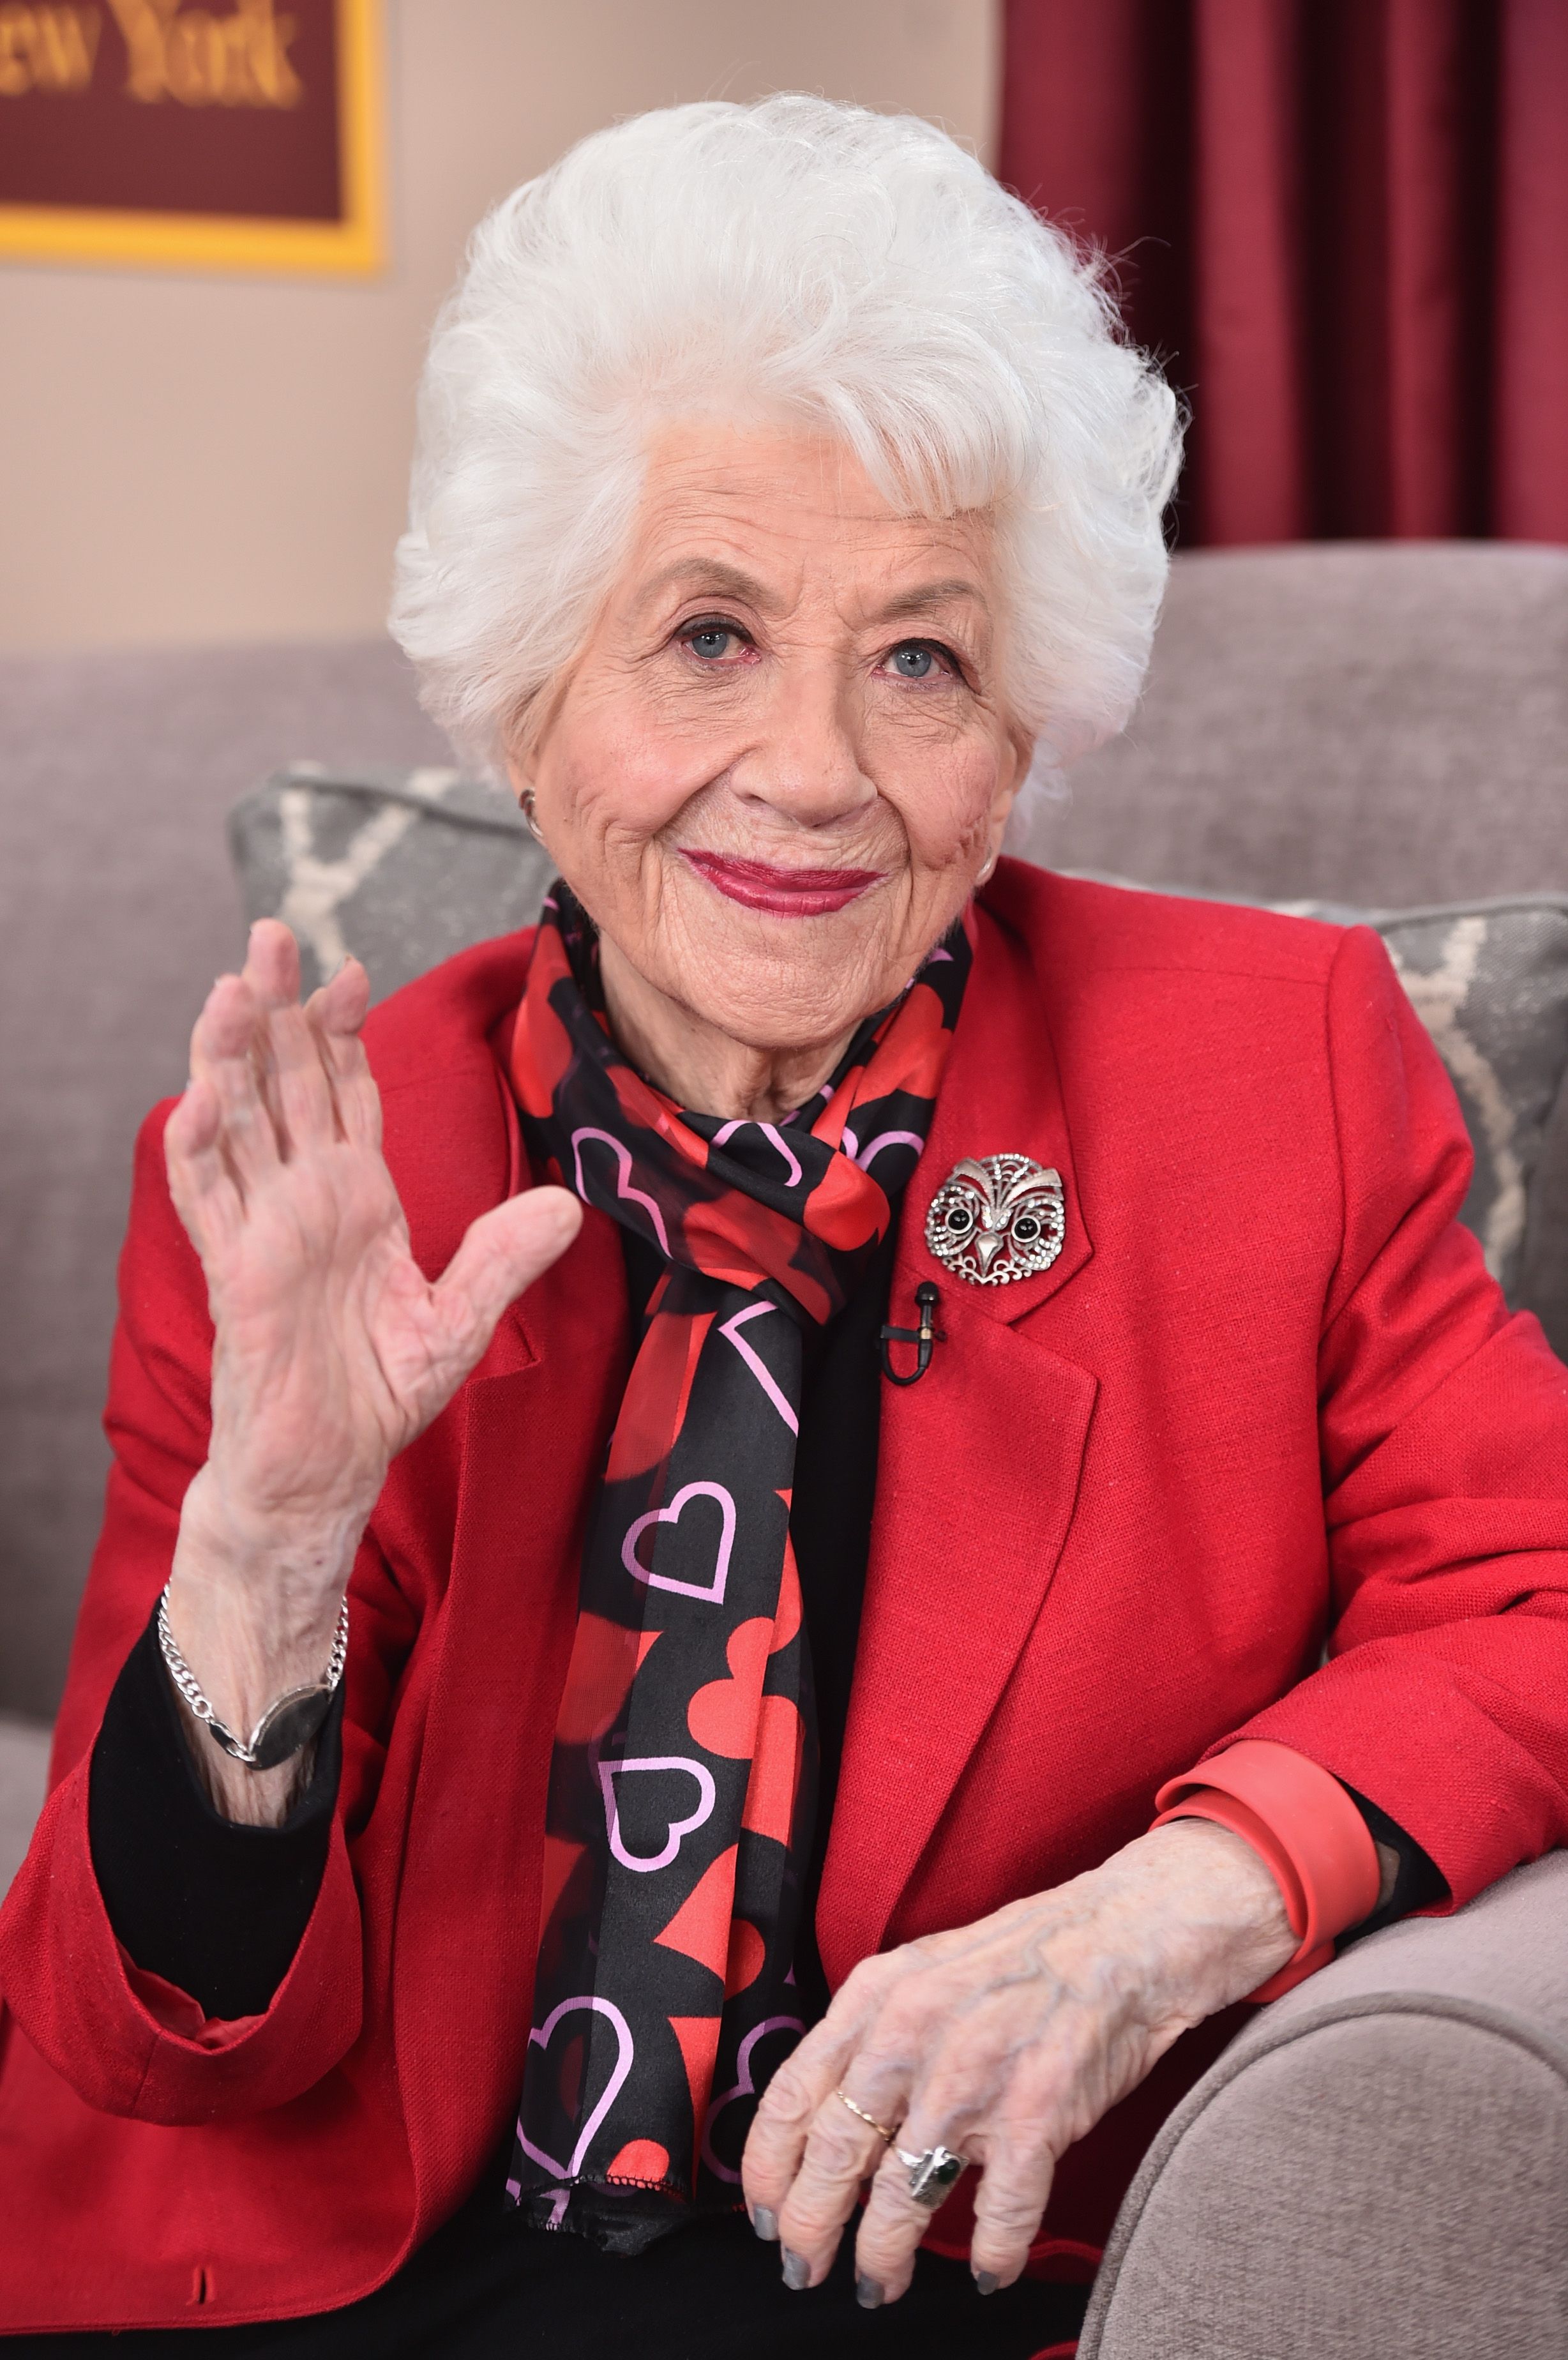 Charlotte Rae attends the "Facts Of Life Reunion" at Universal Studios Backlot on February 12, 2016 in Universal City, California. | Source: Getty Images